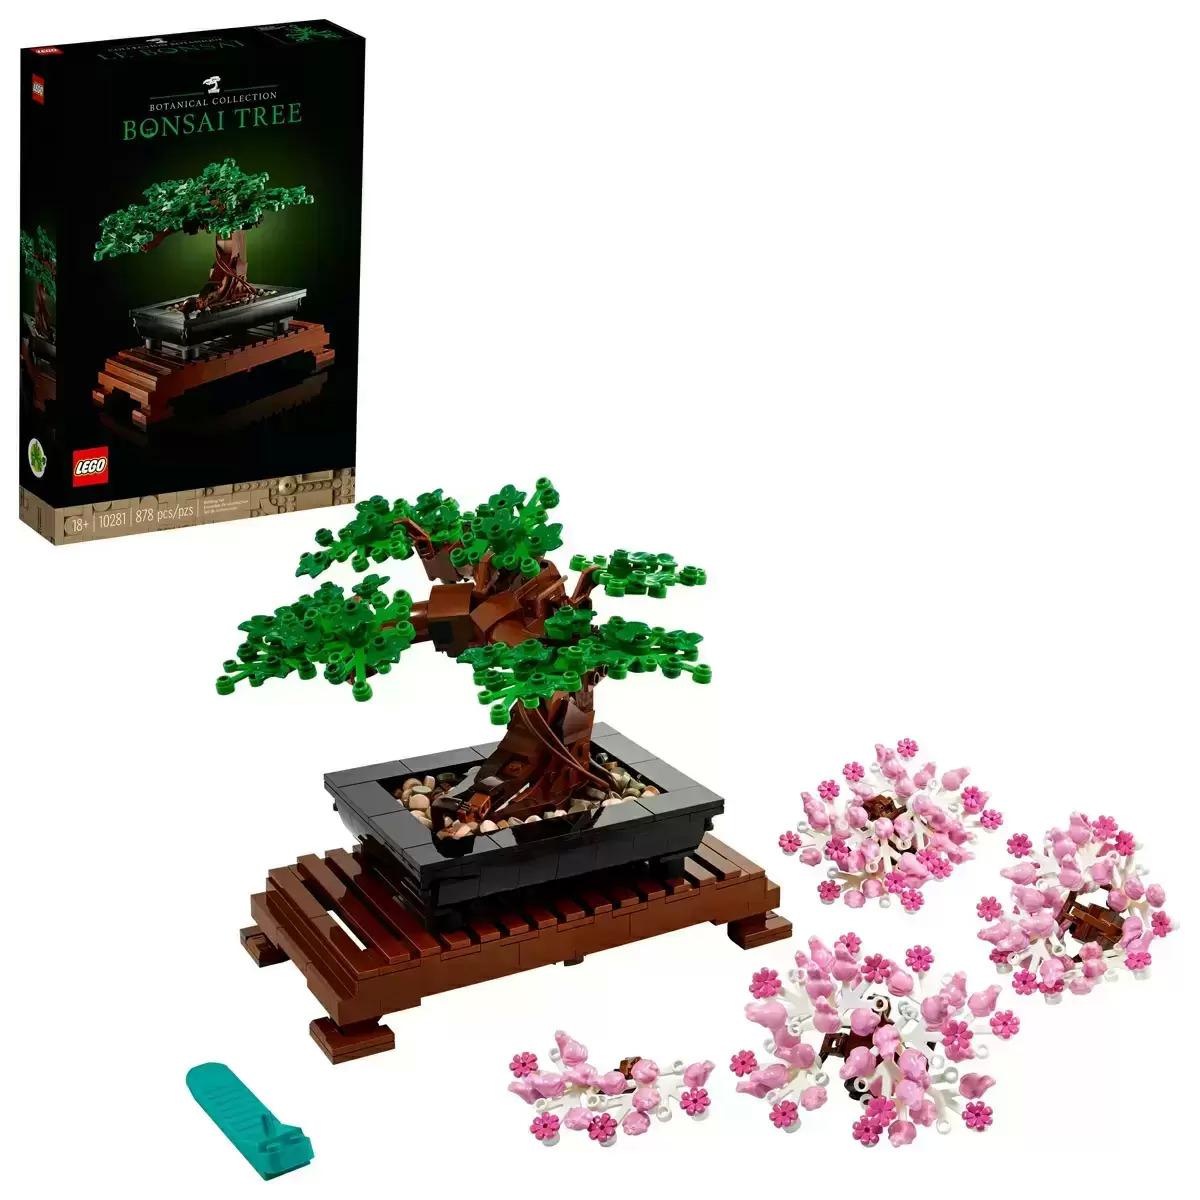 878-Piece LEGO Botanical Collection Bonsai Tree Building Set for $40.99 Shipped